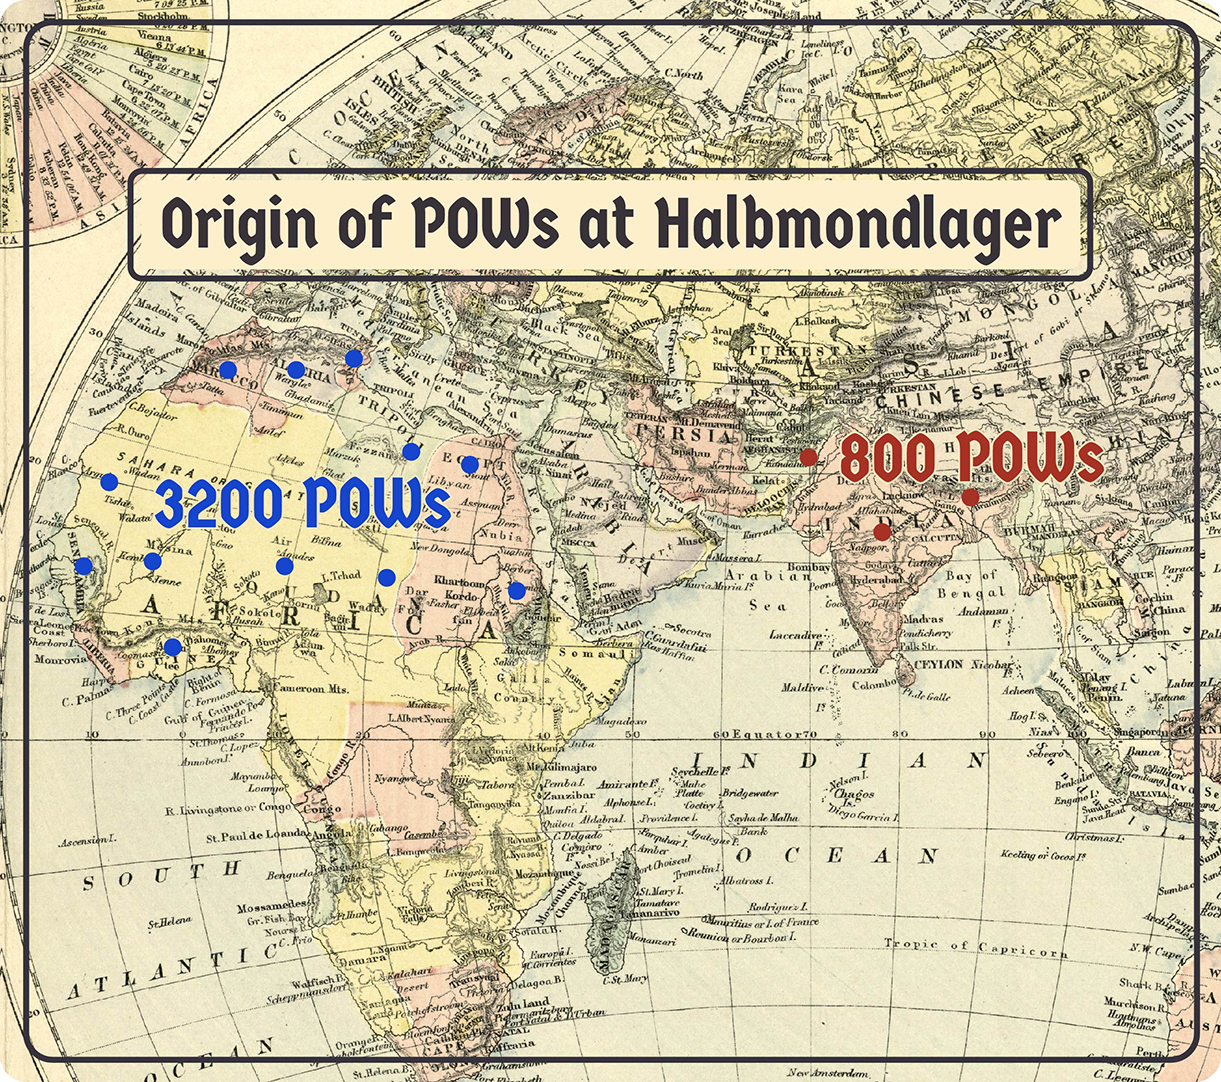 Vintage-looking map of Europe, West Asia and Africa with inserted text. Text: Origin of POWs at Halbmondlager. Text over Africa: 3200 POWs. Text over West Asia: 800 POWs.